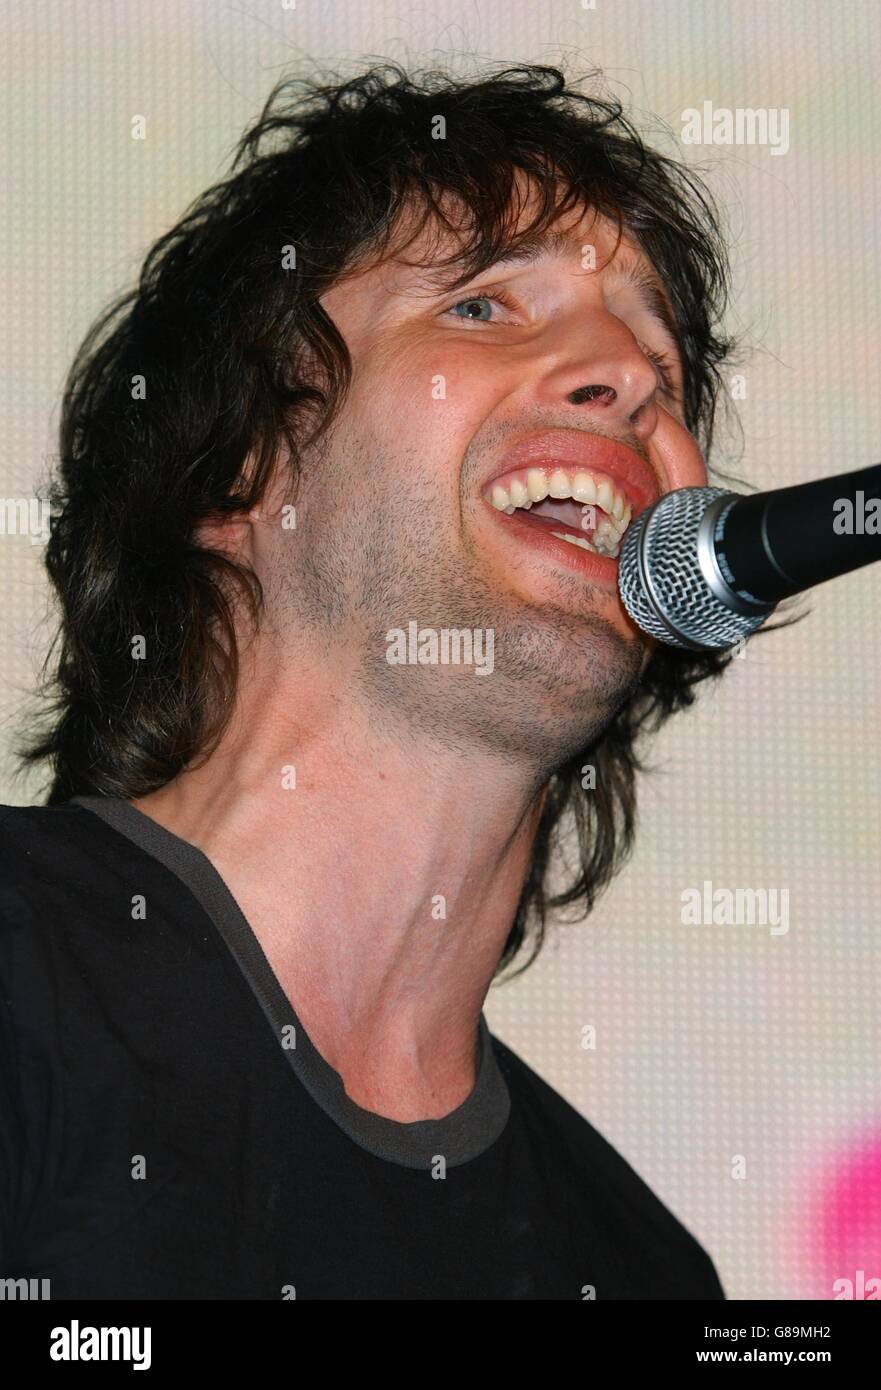 James Blunt performing on stage during an in-store concert. Stock Photo